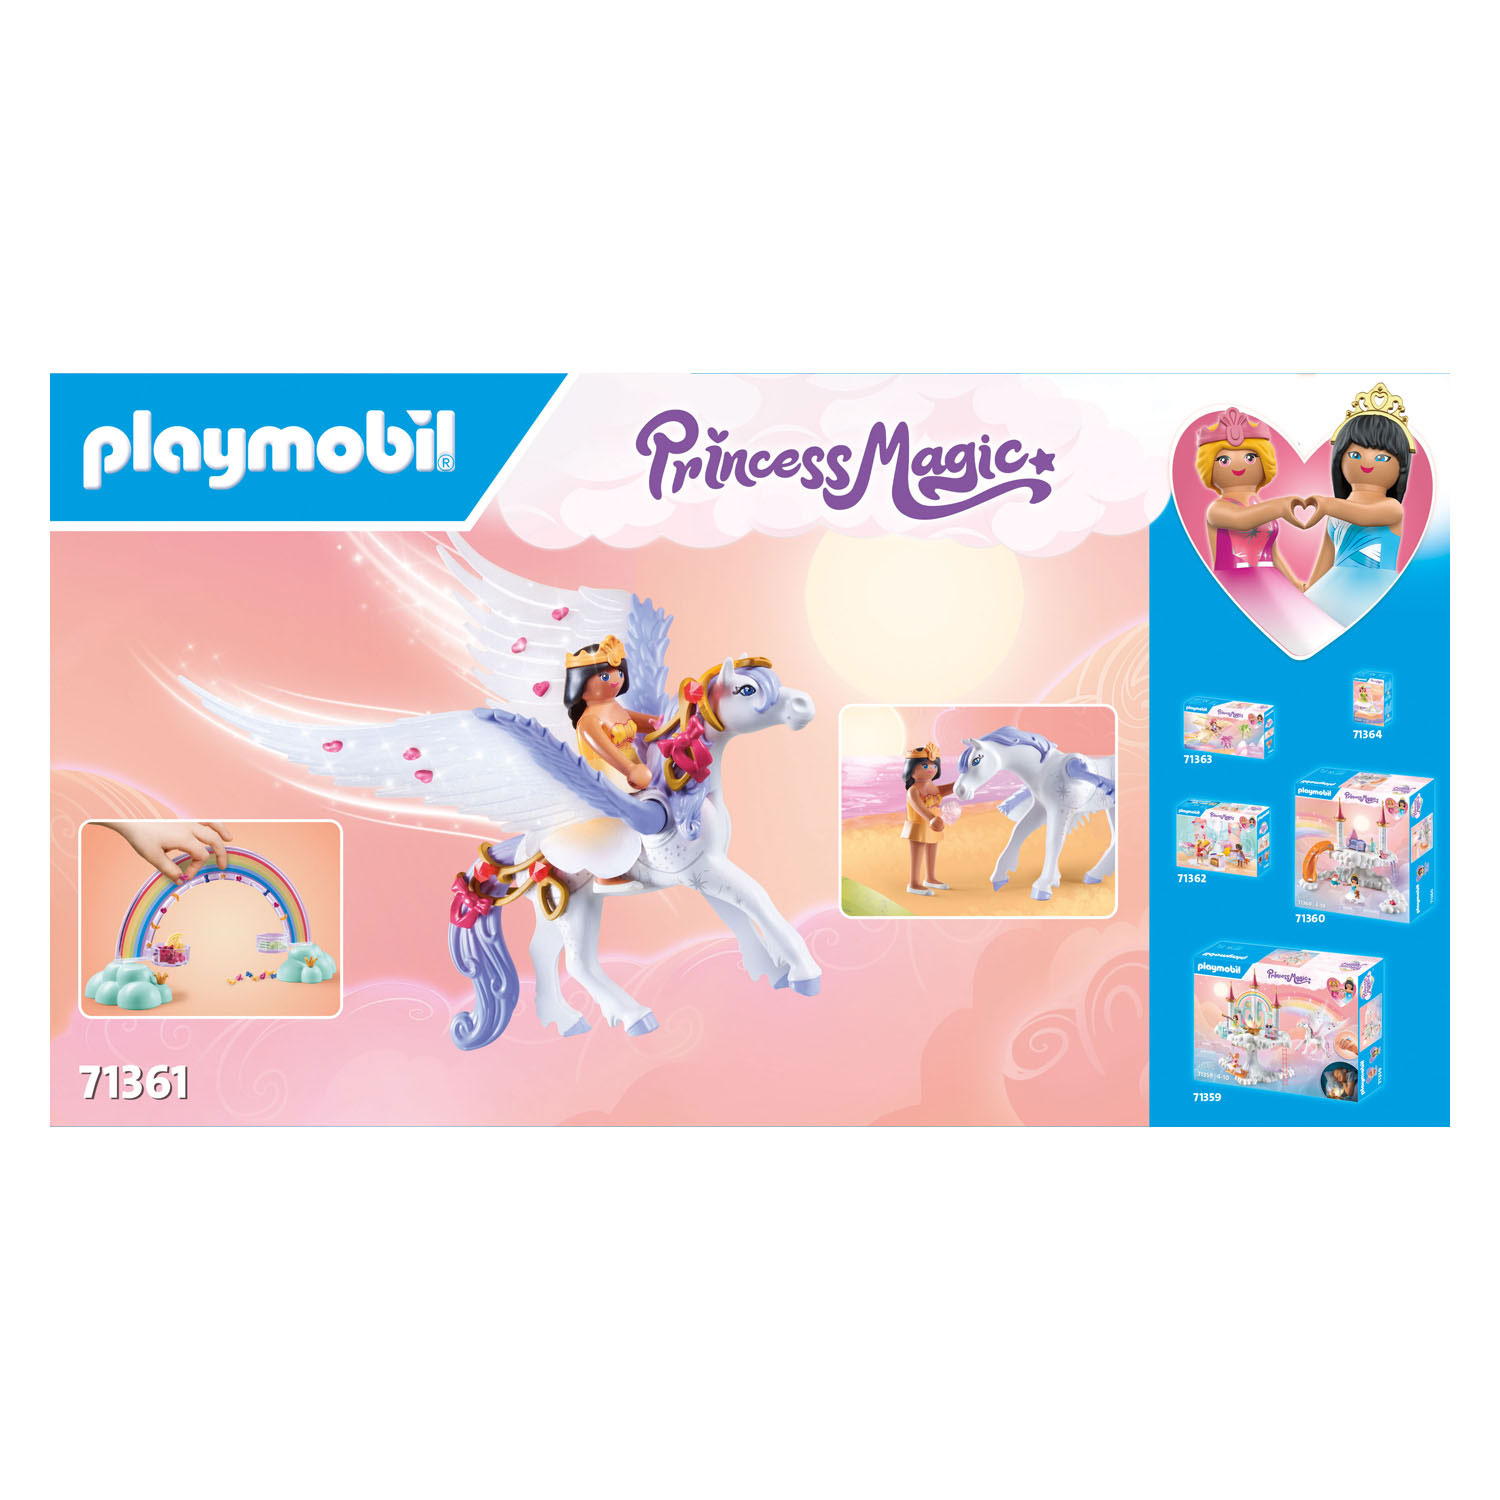 Princess Party in the Clouds - 71362